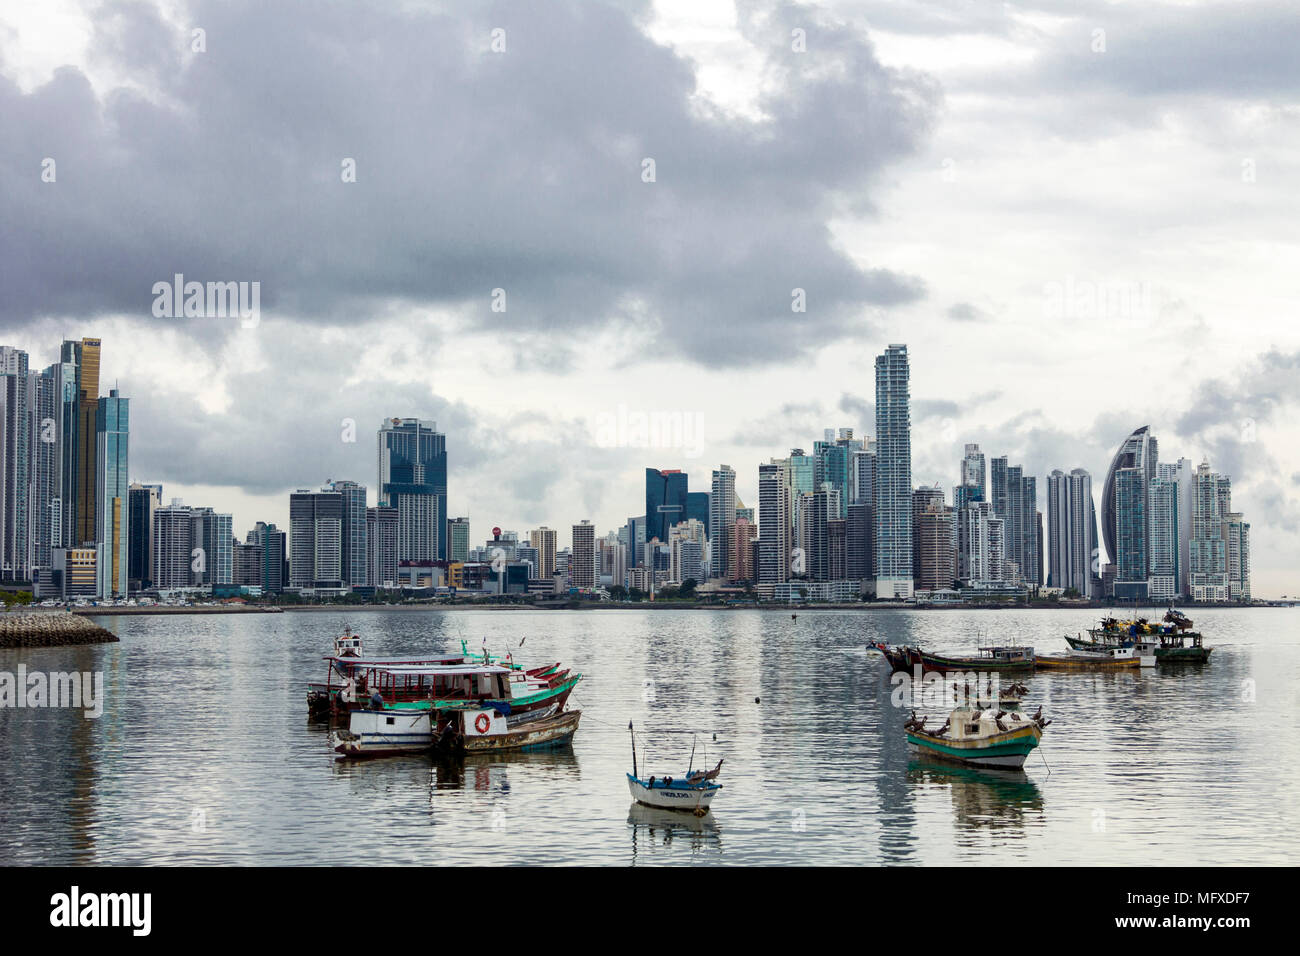 The Panama City, Panama, skyline of modern high rises contrasts with the small fishing boats in the foreground at the city's fish market Stock Photo